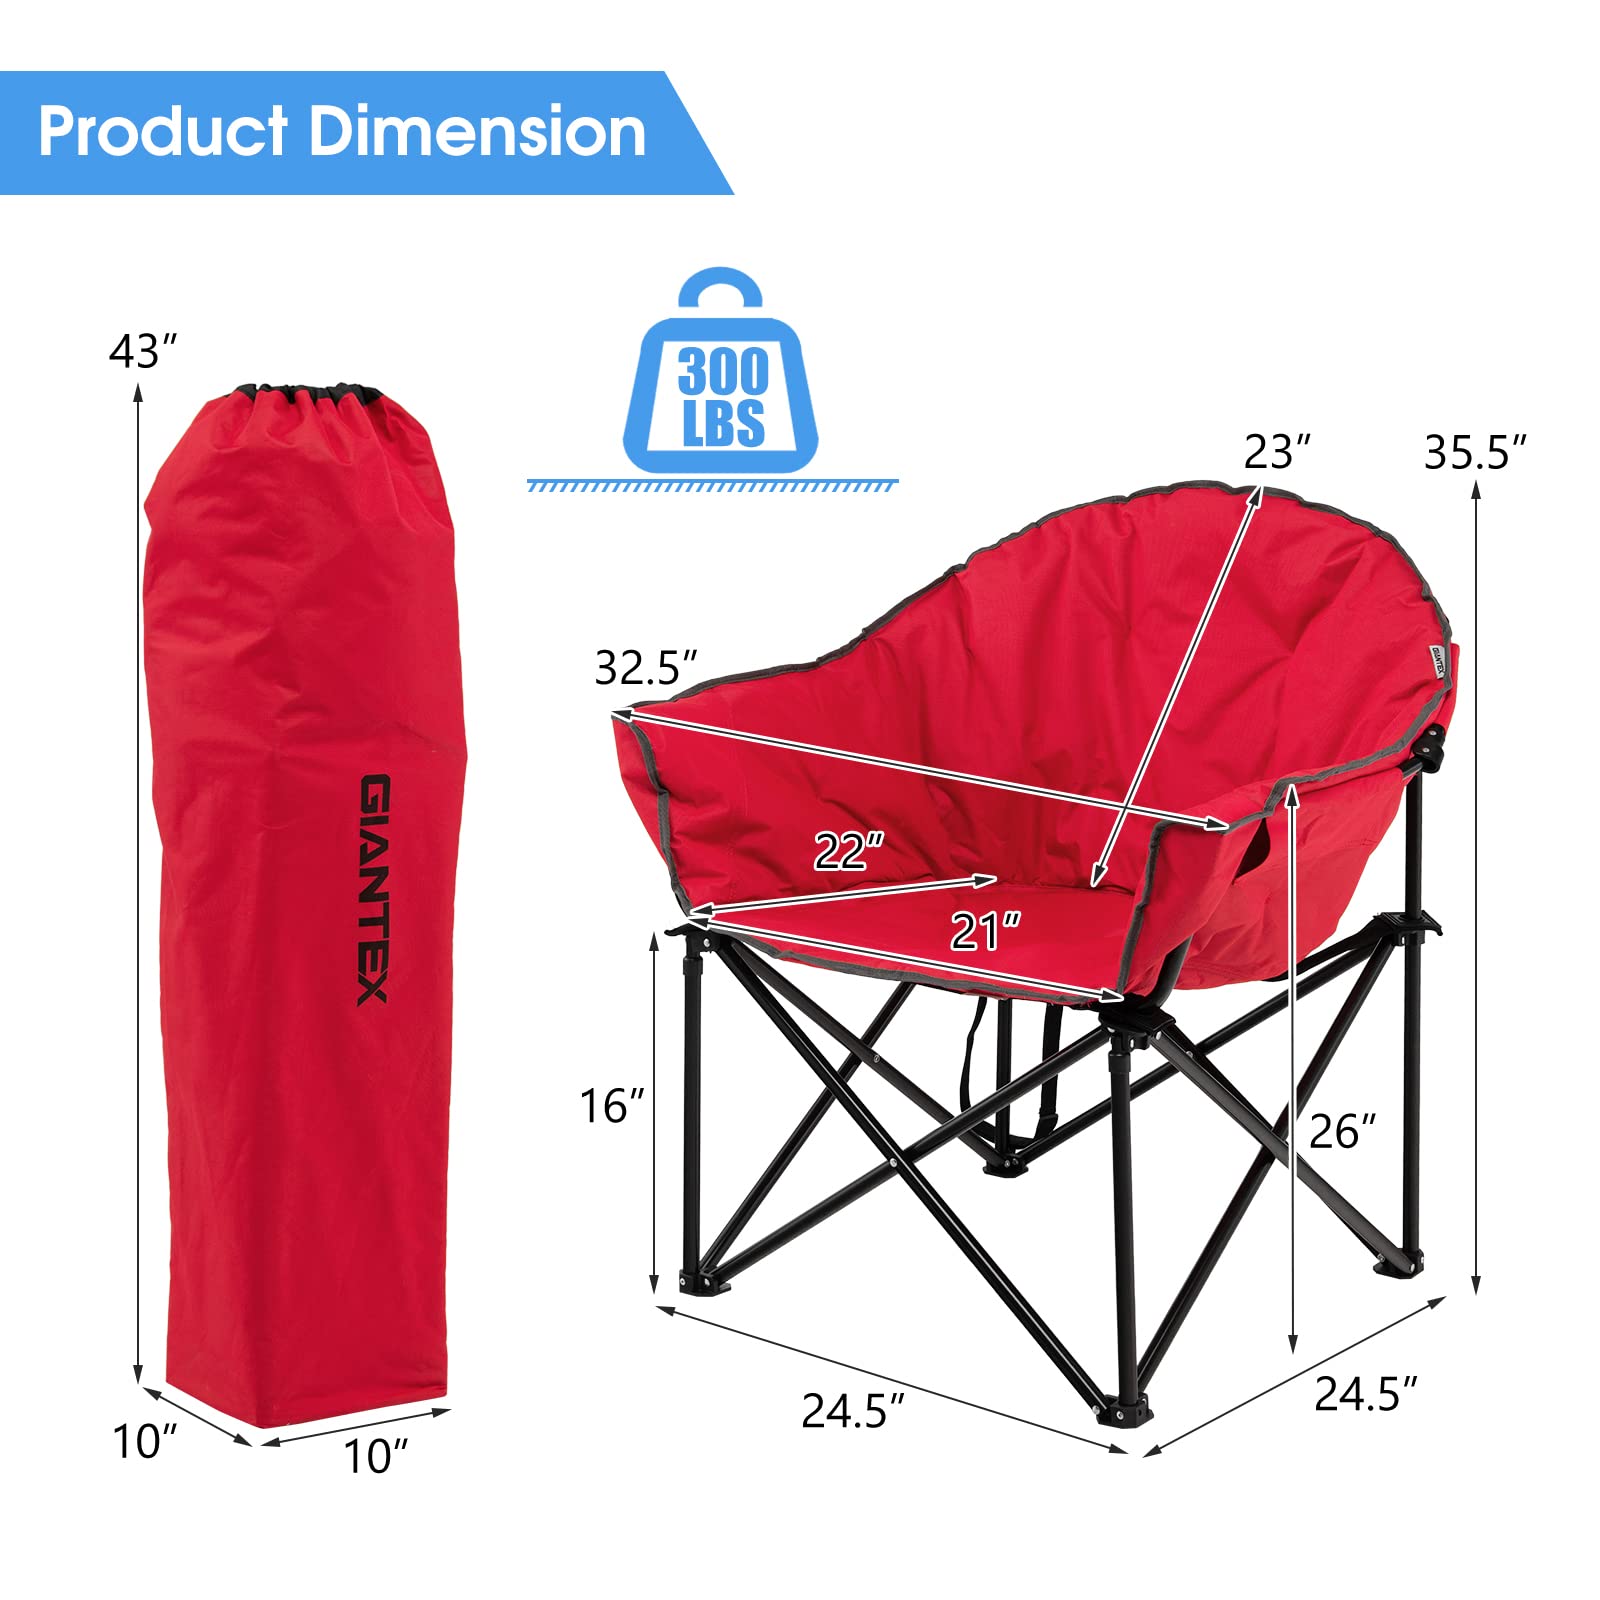 Giantex Portable Camping Chair, Lawn Chair, Outdoor Folding Chair with Cup Holder, Soft Seat